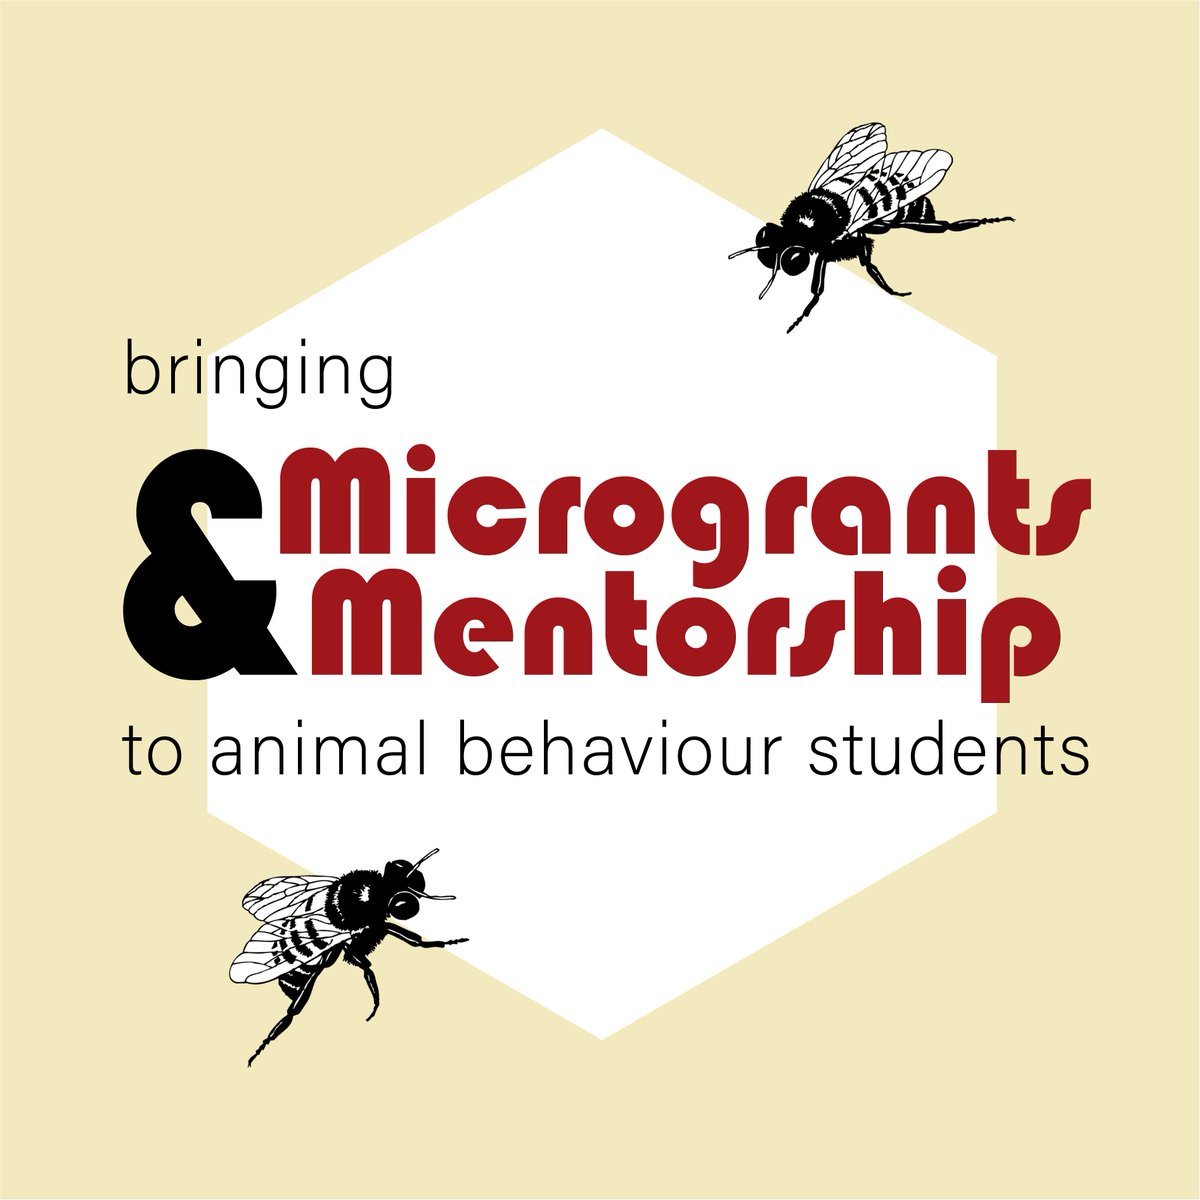 Hello!! We're the Animal Behaviour Collective - a collective of animal behaviour researchers organising microgrants (animalbehaviourcollective.org) & mentorship (forms.gle/Uzjw1gSspRYVqK…) for undergraduate & graduate students in animal behaviour. We've just launched our website today!!